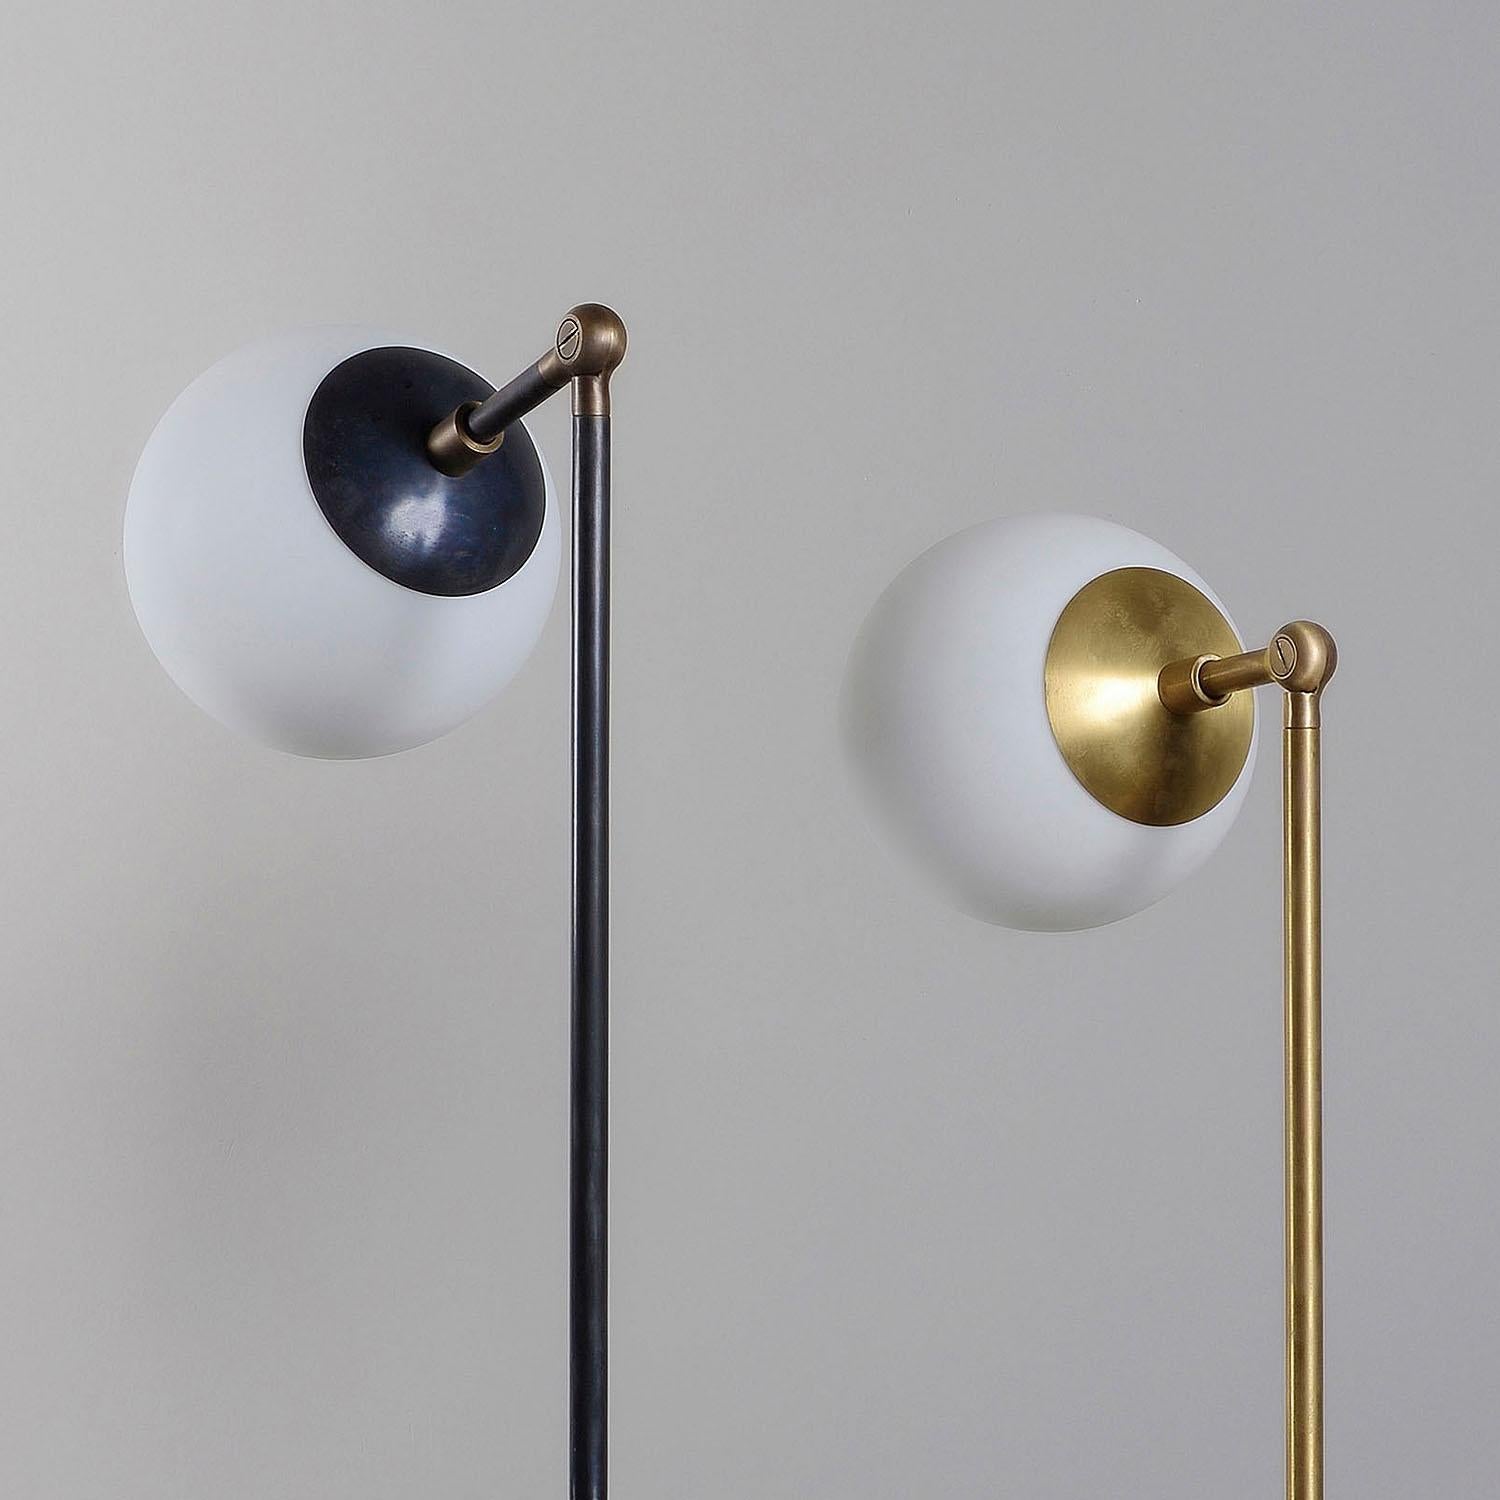 Contemporary Sculpted Brass & Glass Pendant, Tango One Globe by Paul Matter
Set of 2

Tango is born from playful experimentation with vintage lighting components.
Burnt, aged brass and etched glass are combined to create lighting fixtures that fuse